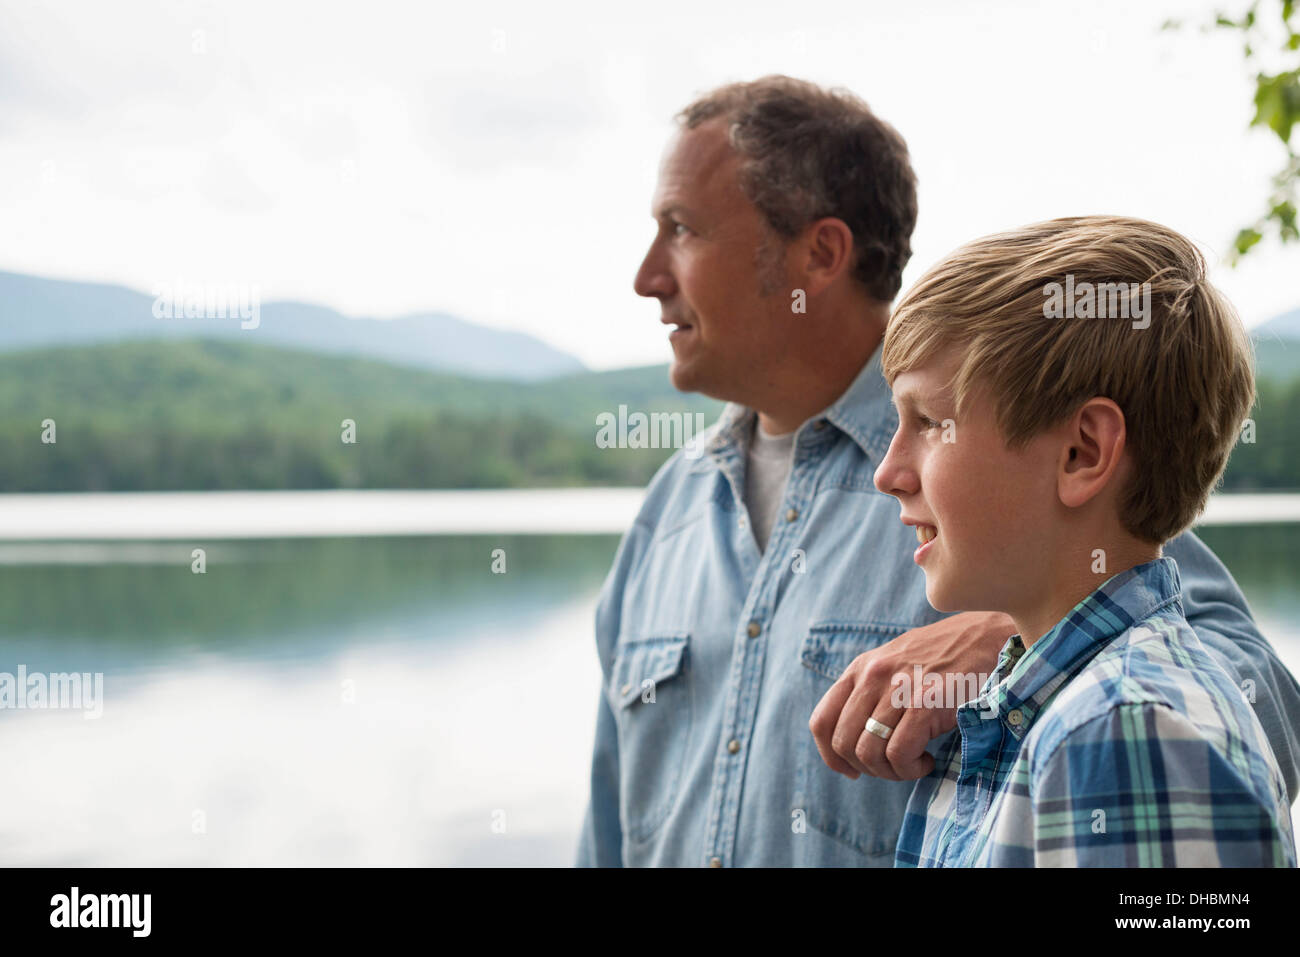 A family outdoors under the trees on a lake shore. Father and son. Stock Photo